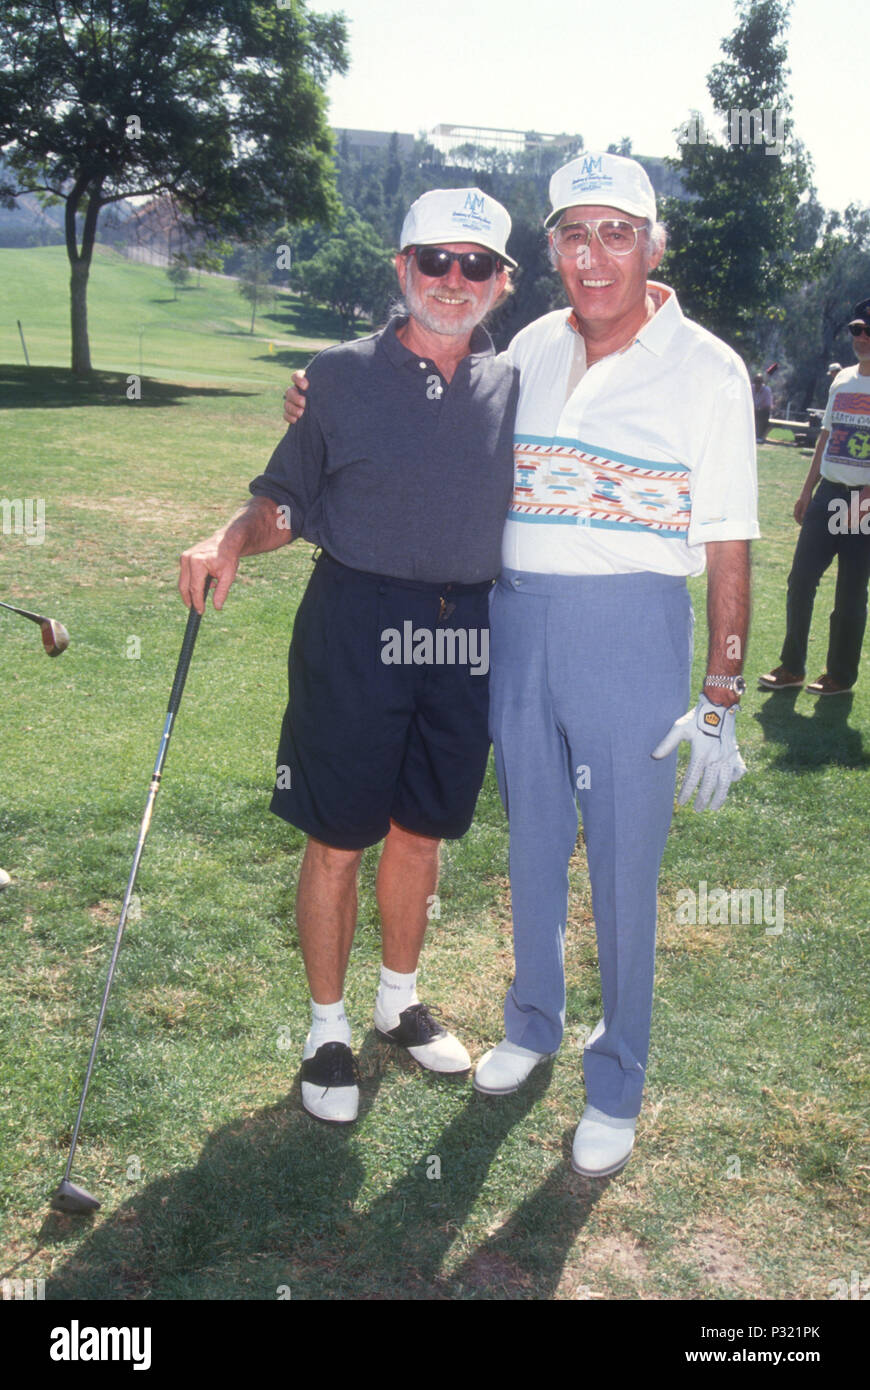 BURBANK, CA - OCTOBER 14: (L-R) Singers Willie Nelson and Carl Perkins attend Willie Nelson Golf Tournament on October 14, 1991 in Burbank, California. Photo by Barry King/Alamy Stock Photo Stock Photo